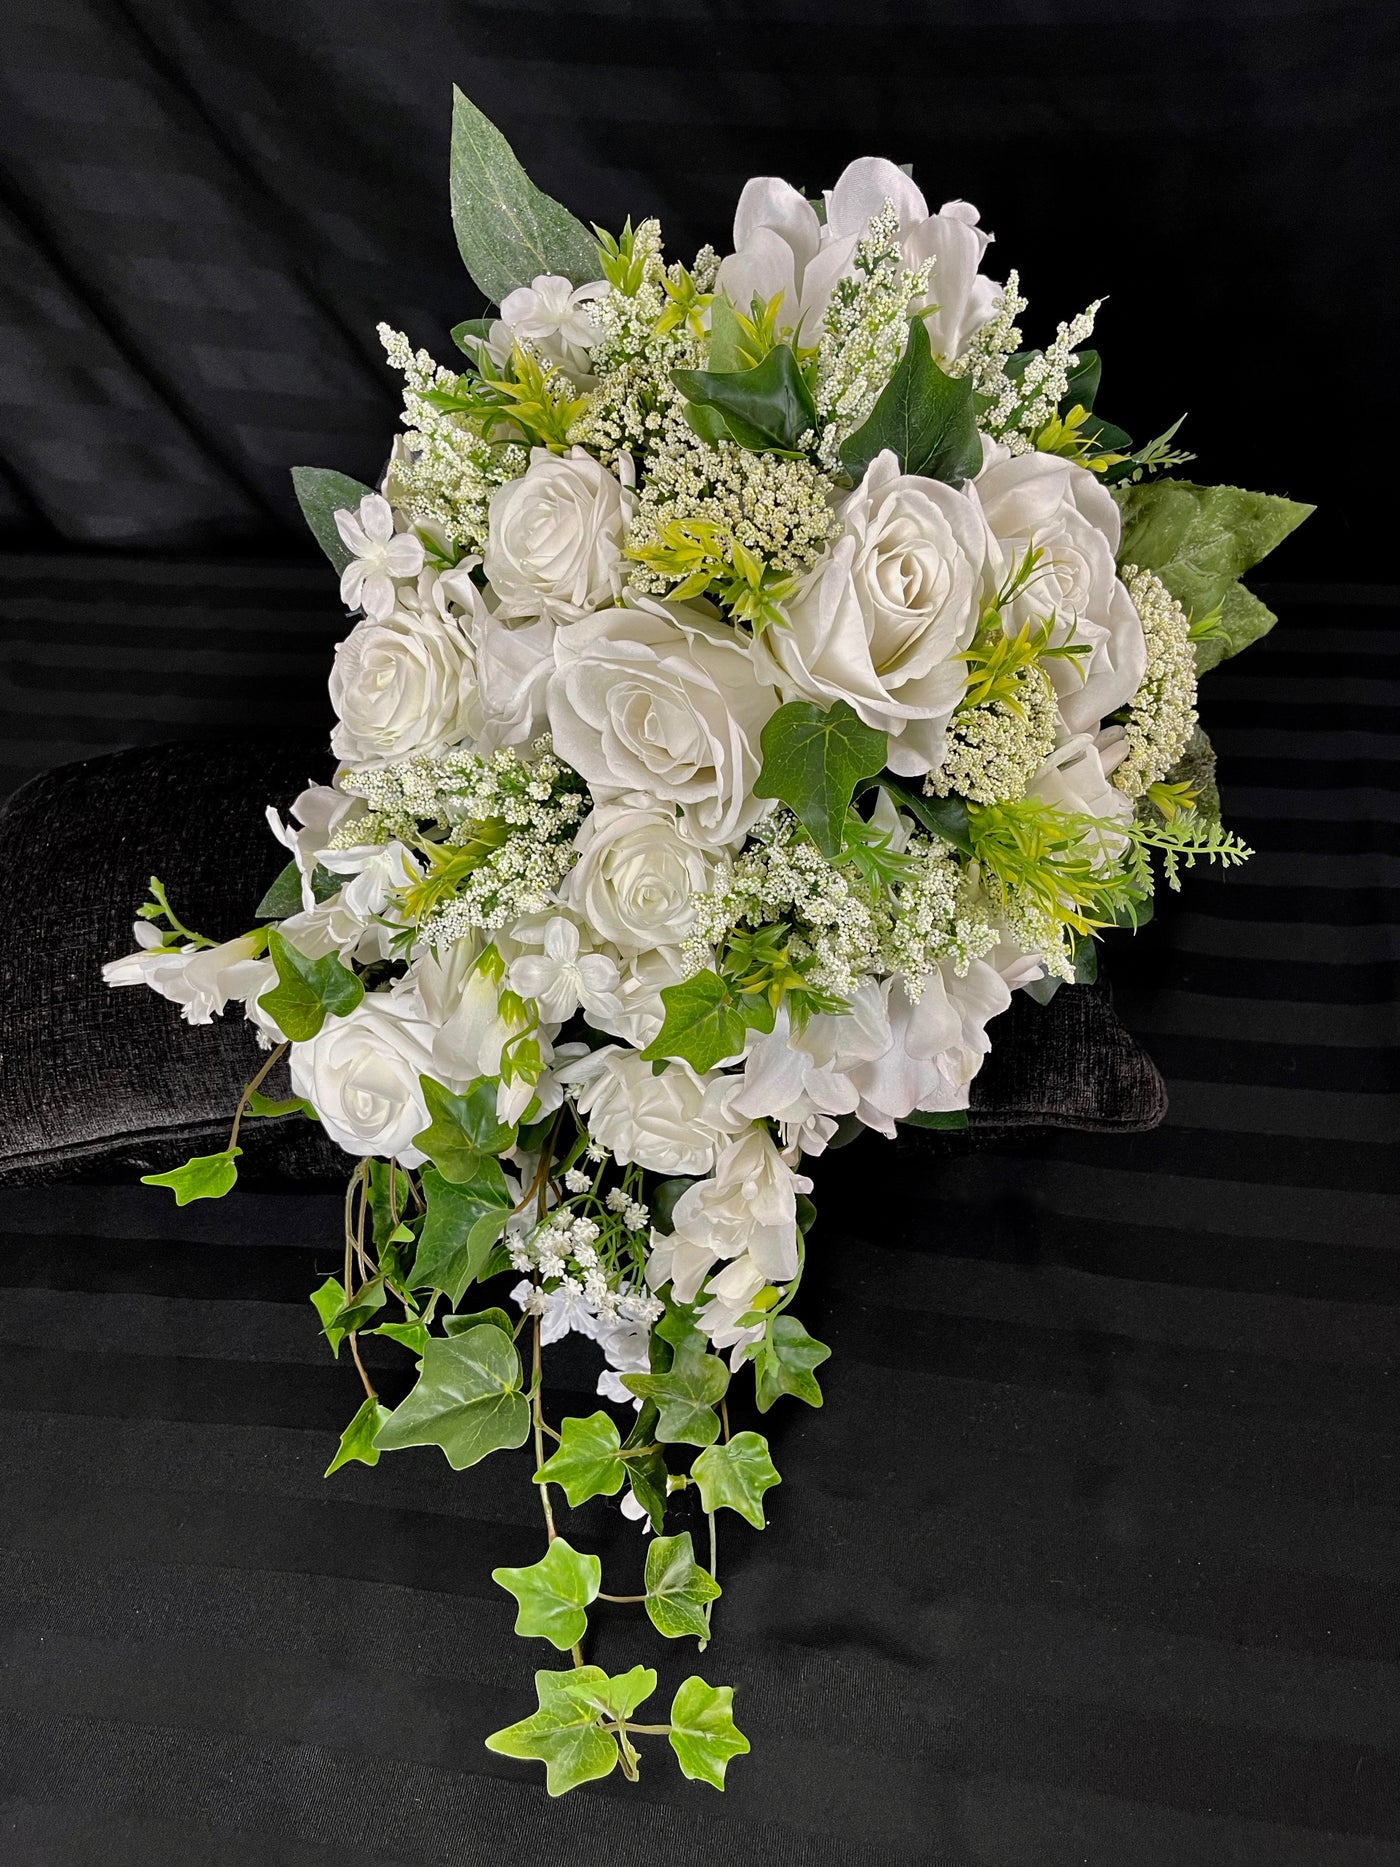 Savour the elegant lines of this cascading all white bridal bouquet. This lovely compilation of three different sizes of crisp white roses nestled in deep green Ivy foliage with playful astilbe peeking out is the epitome of elega